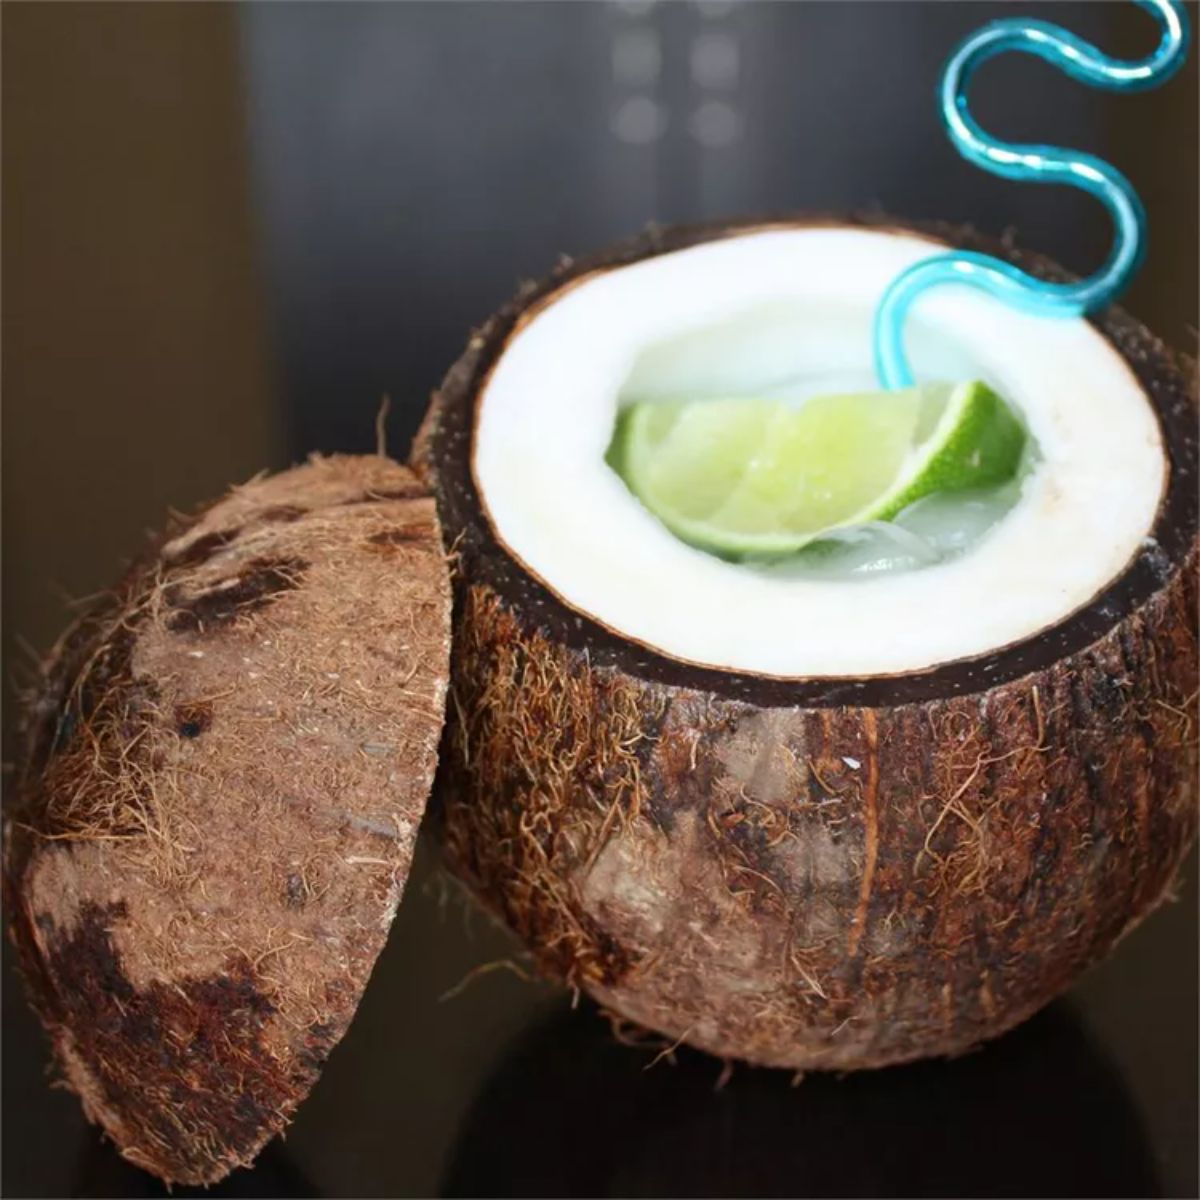 Coco Loco cocktail in a coconut shell with a straw and a piece of lime.